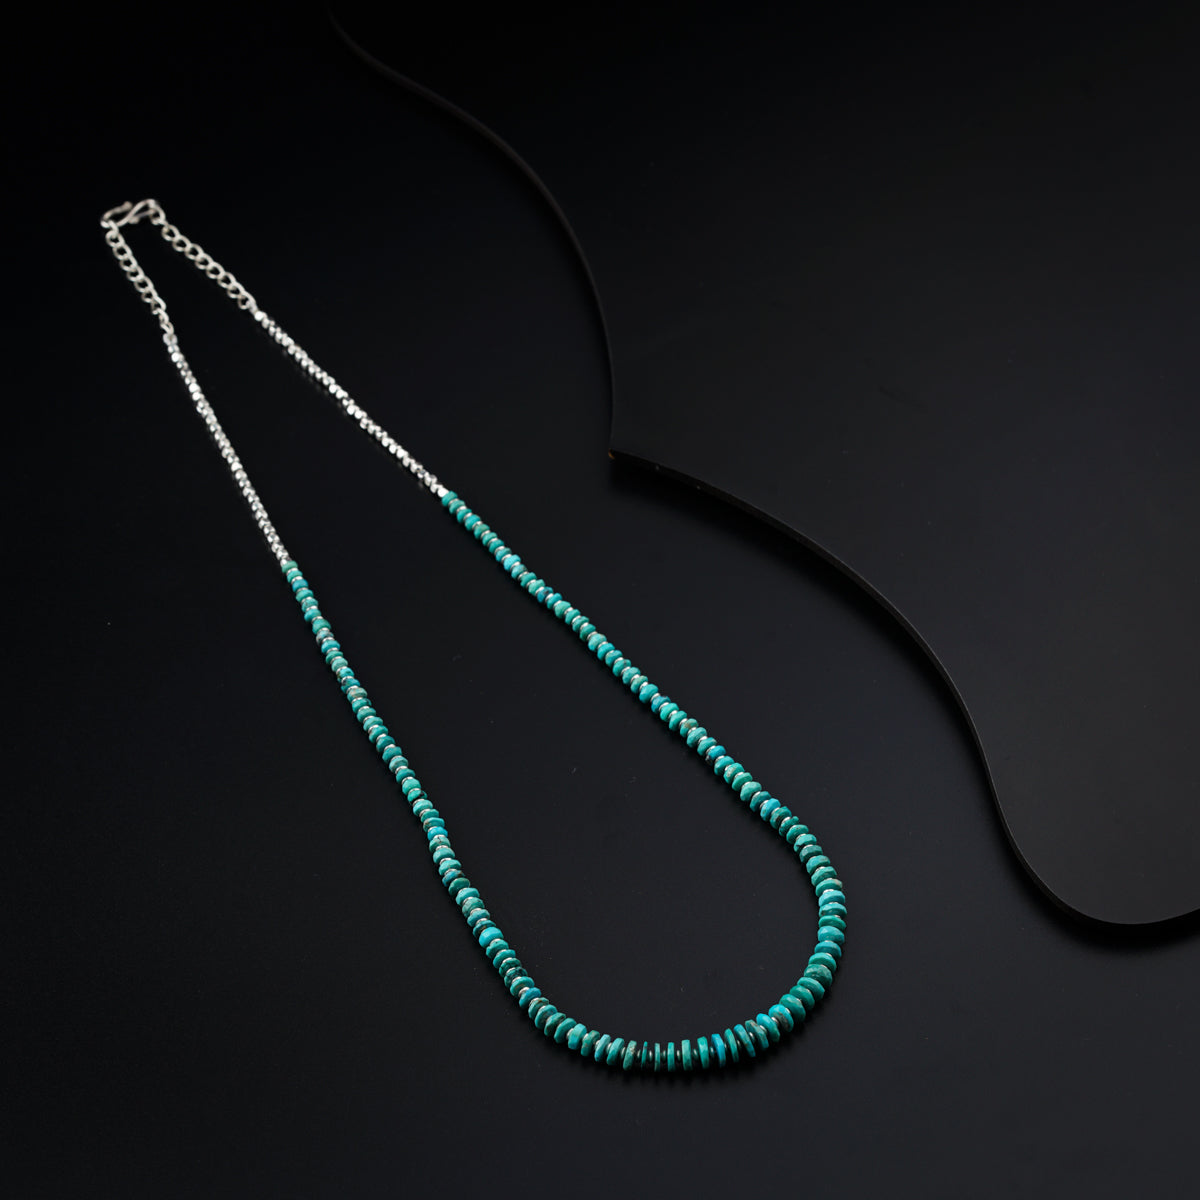 Silver and turquoise chain